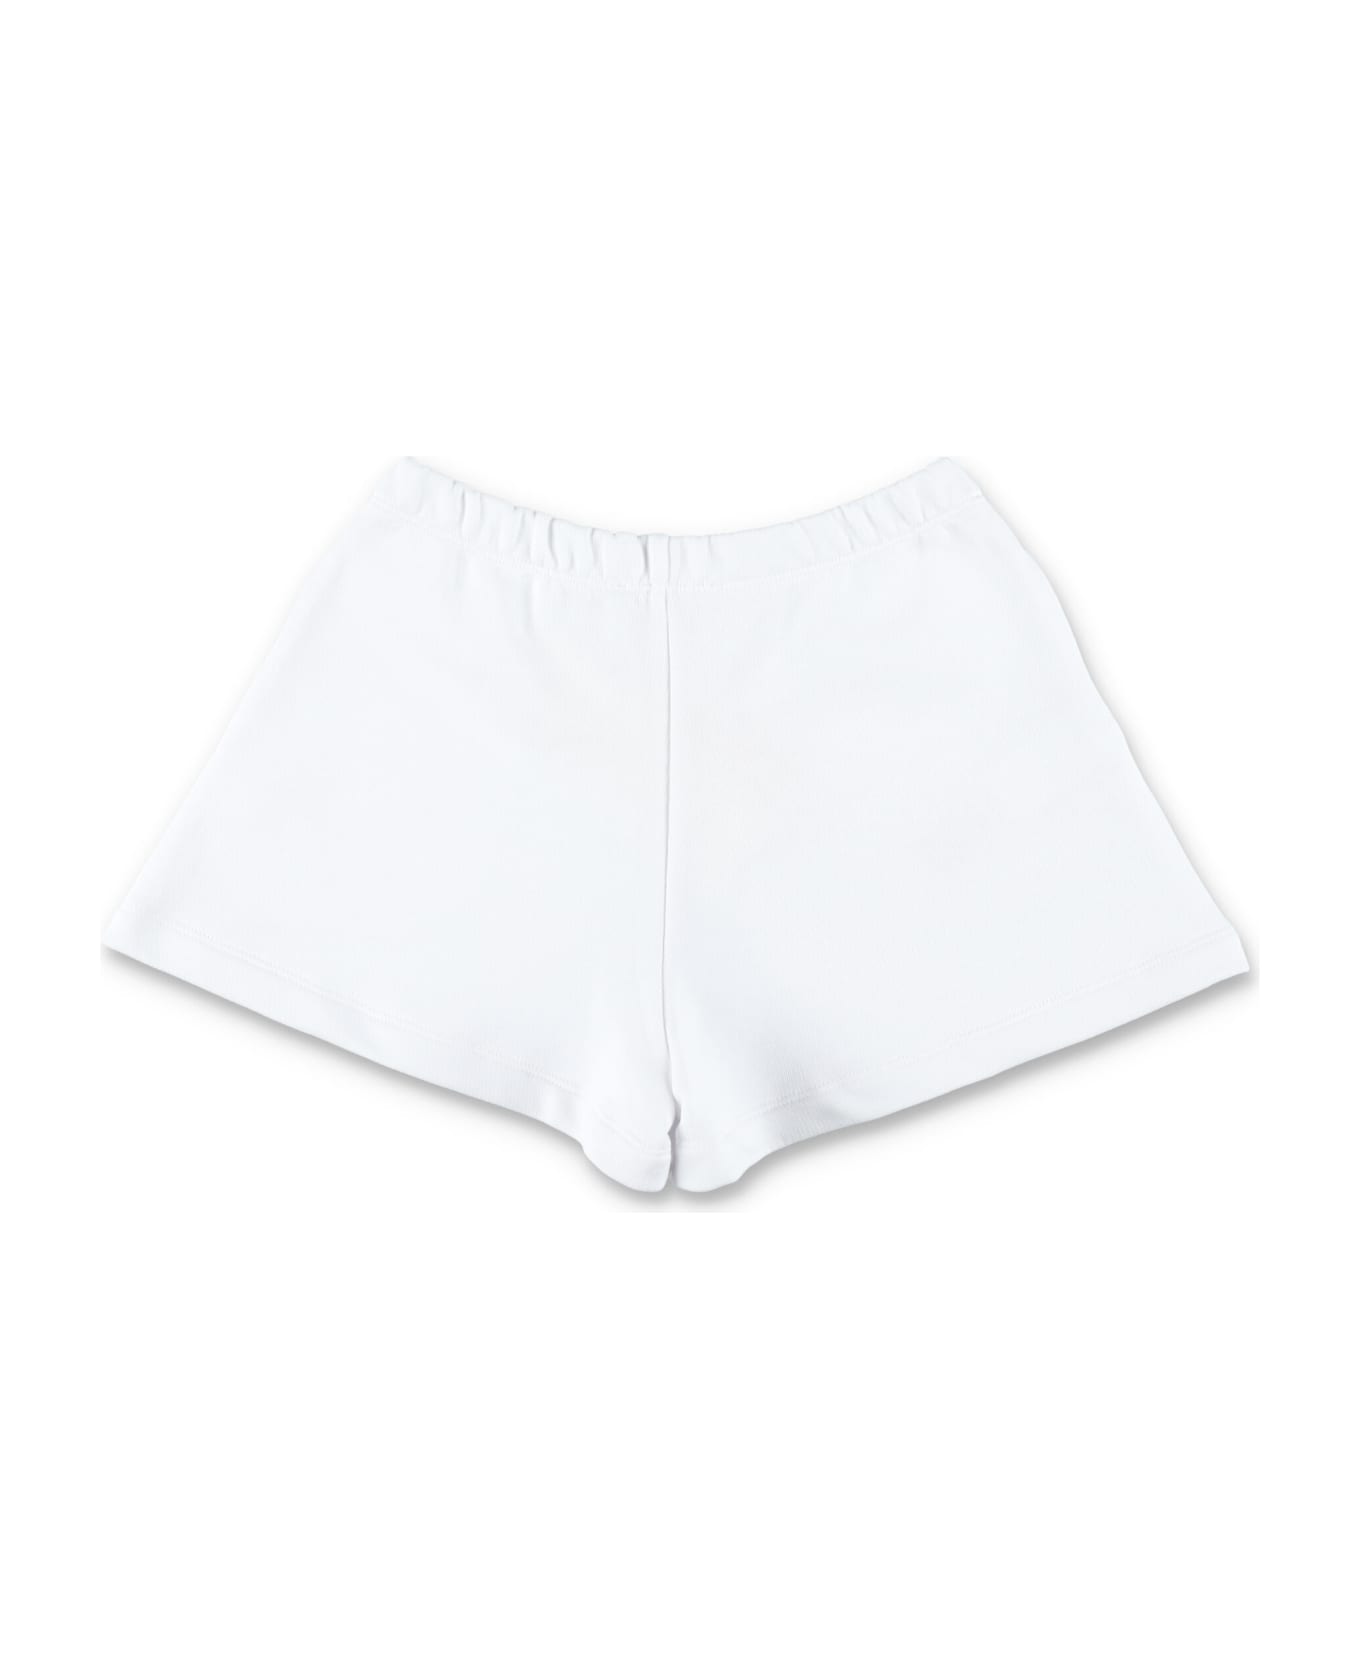 Marni Fleece Shorts With Floral Graphics - WHITE ボトムス